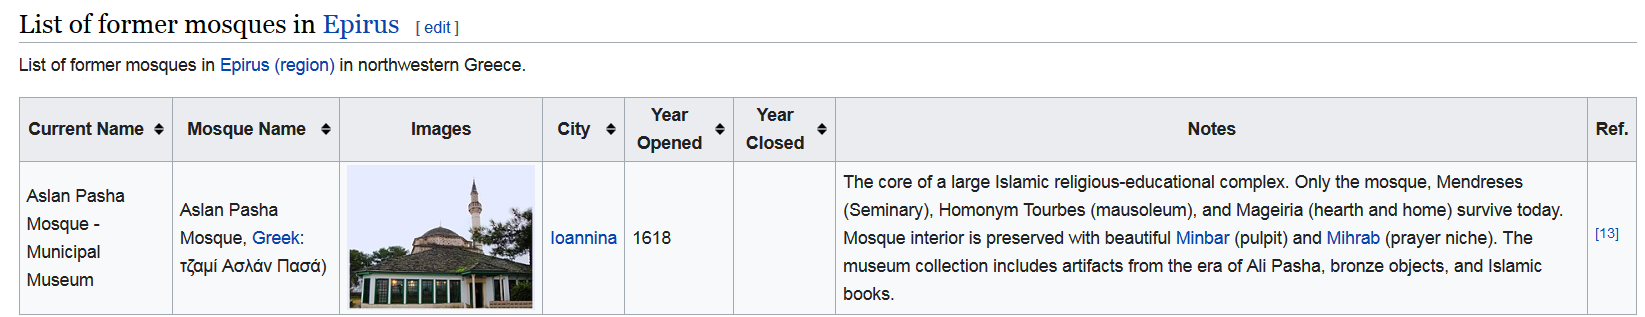 Screenshot_2022-04-06 List of former mosques in Greece - Wikipedia(5).png